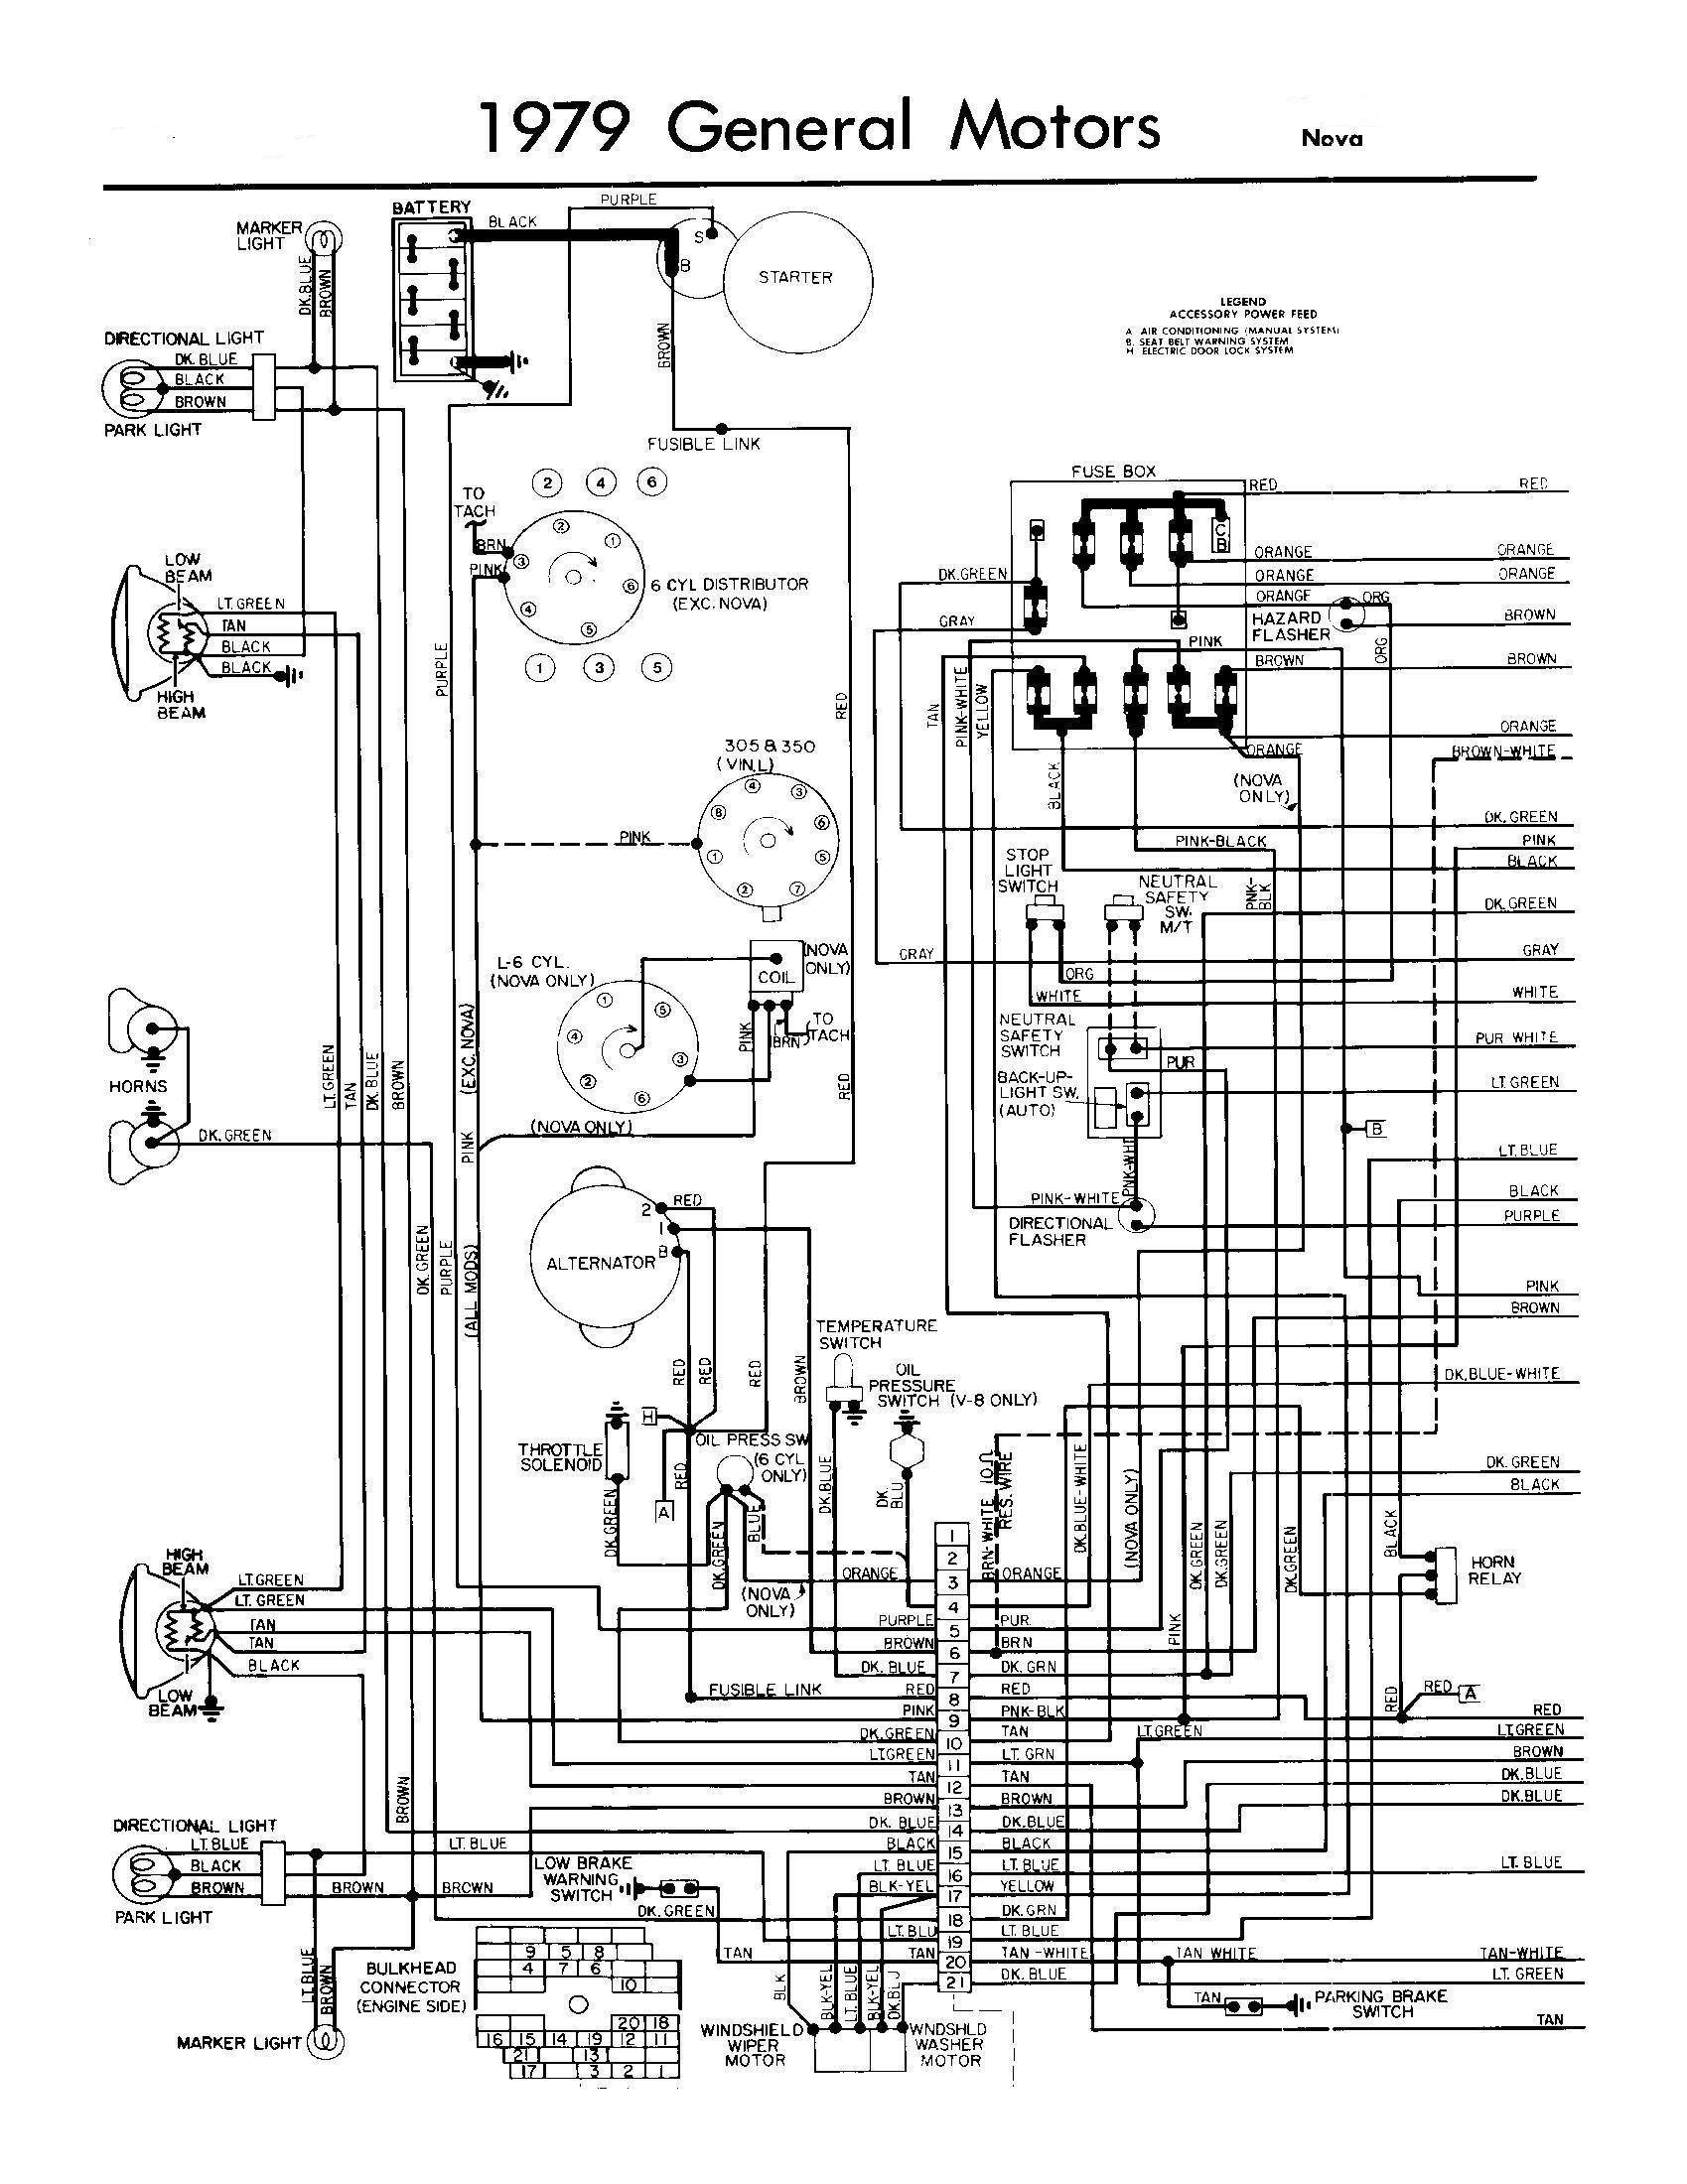 Easy Wiring Harness For 1979 Chevy C10 Truck - Wiring Diagrams Hubs - 1979 Chevy Truck Wiring Diagram